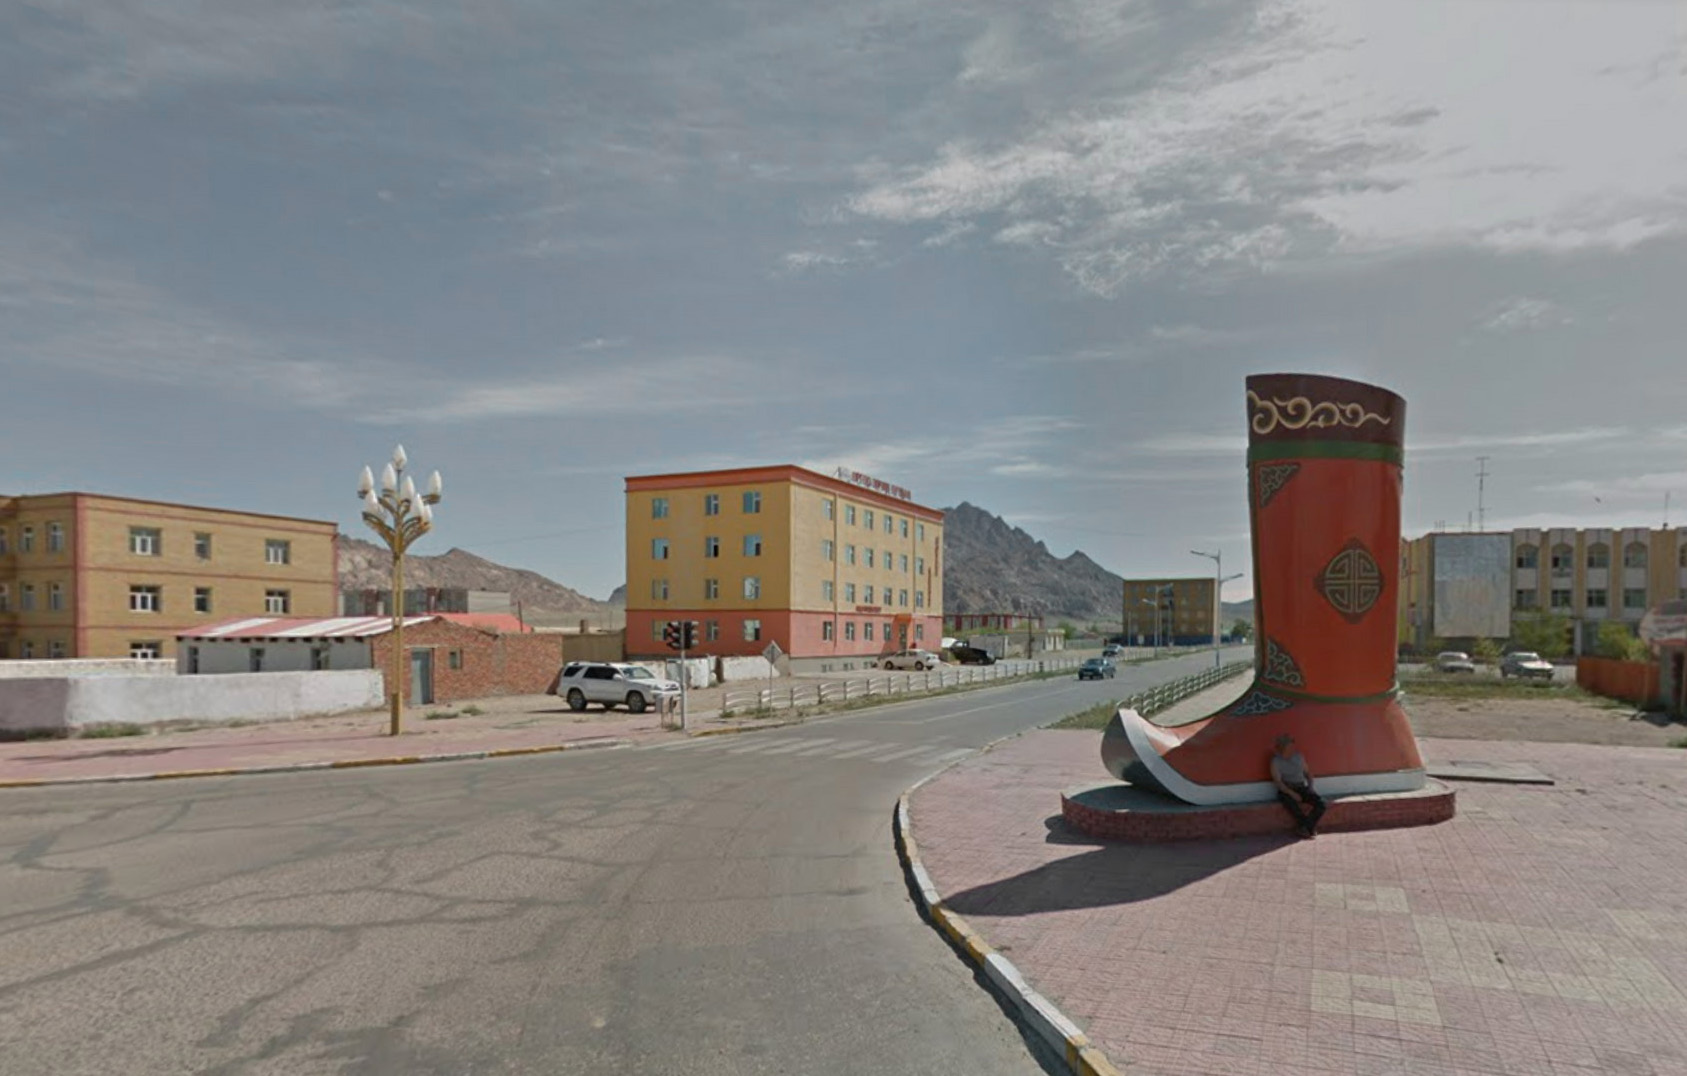 These Google Street View snapshots reveal the understated beauty of the roadside 